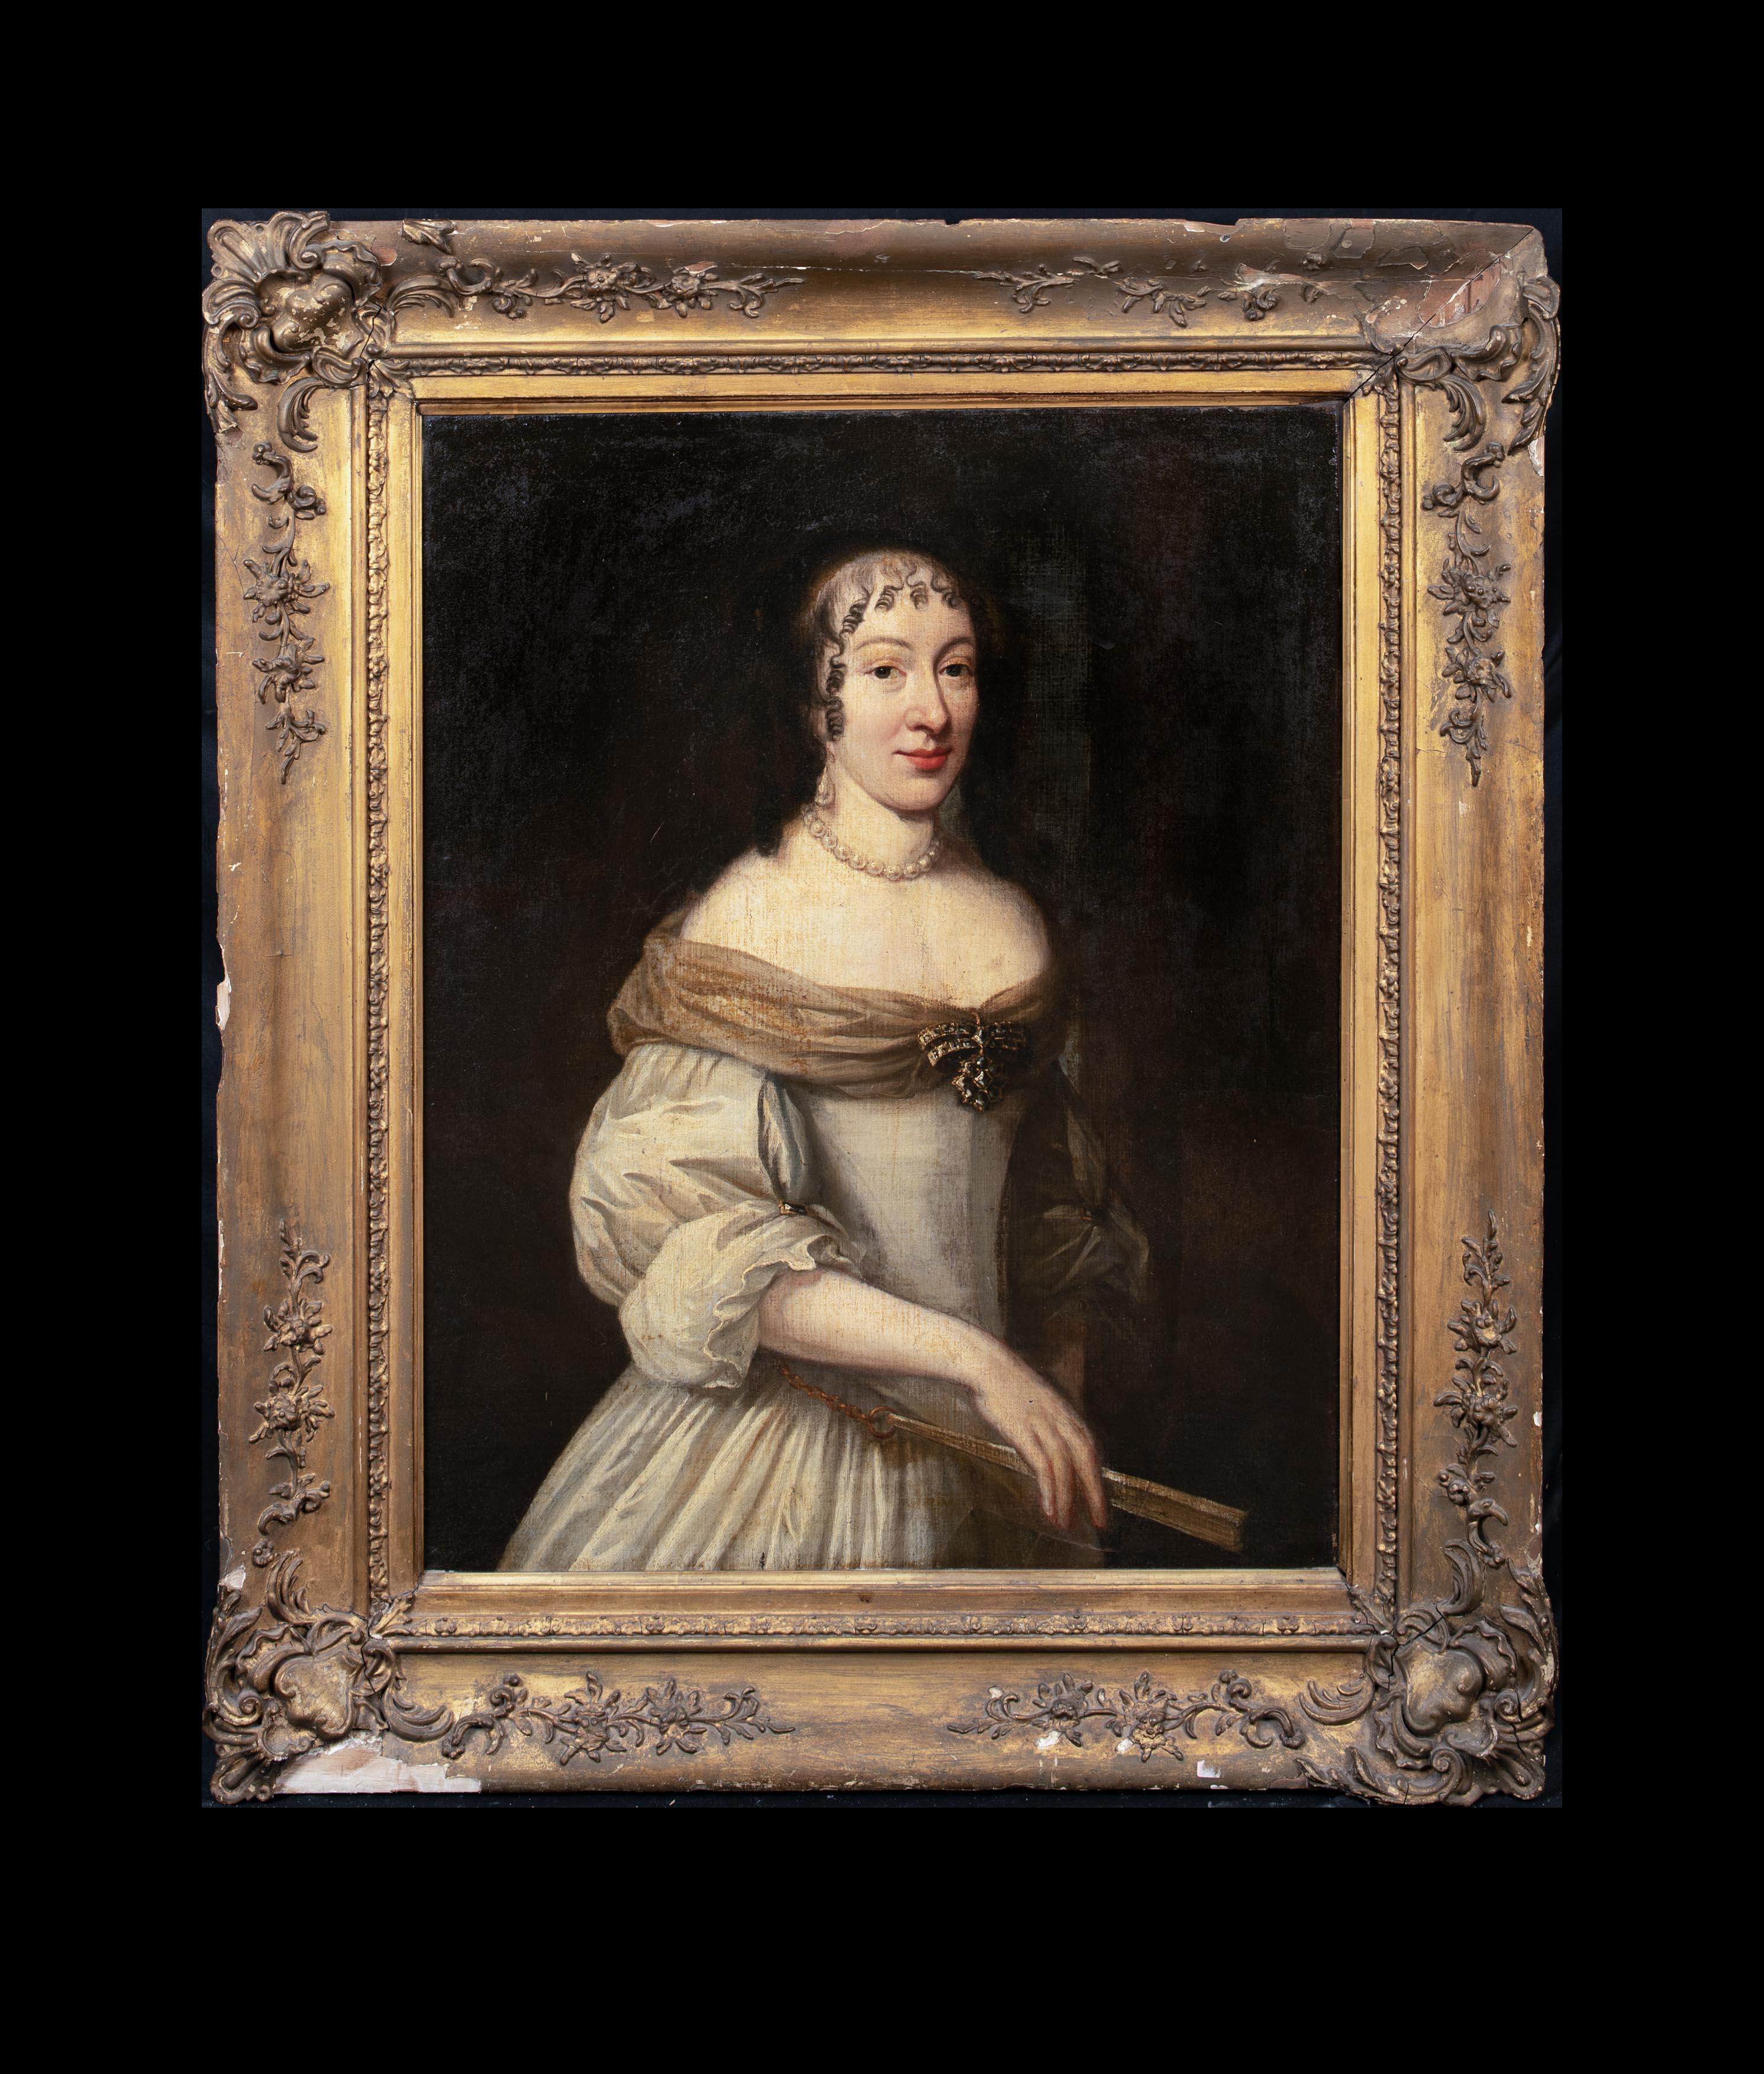 Portrait Of Carlota de Hesse-Kassel, 17th Century

Dutch School

Large 17th Century Dutch old Master portrait of Carlota de Hesse-Kassel. Excellent quality and condition three quarter length portrait of the lady holding a fan wearing pearls and an